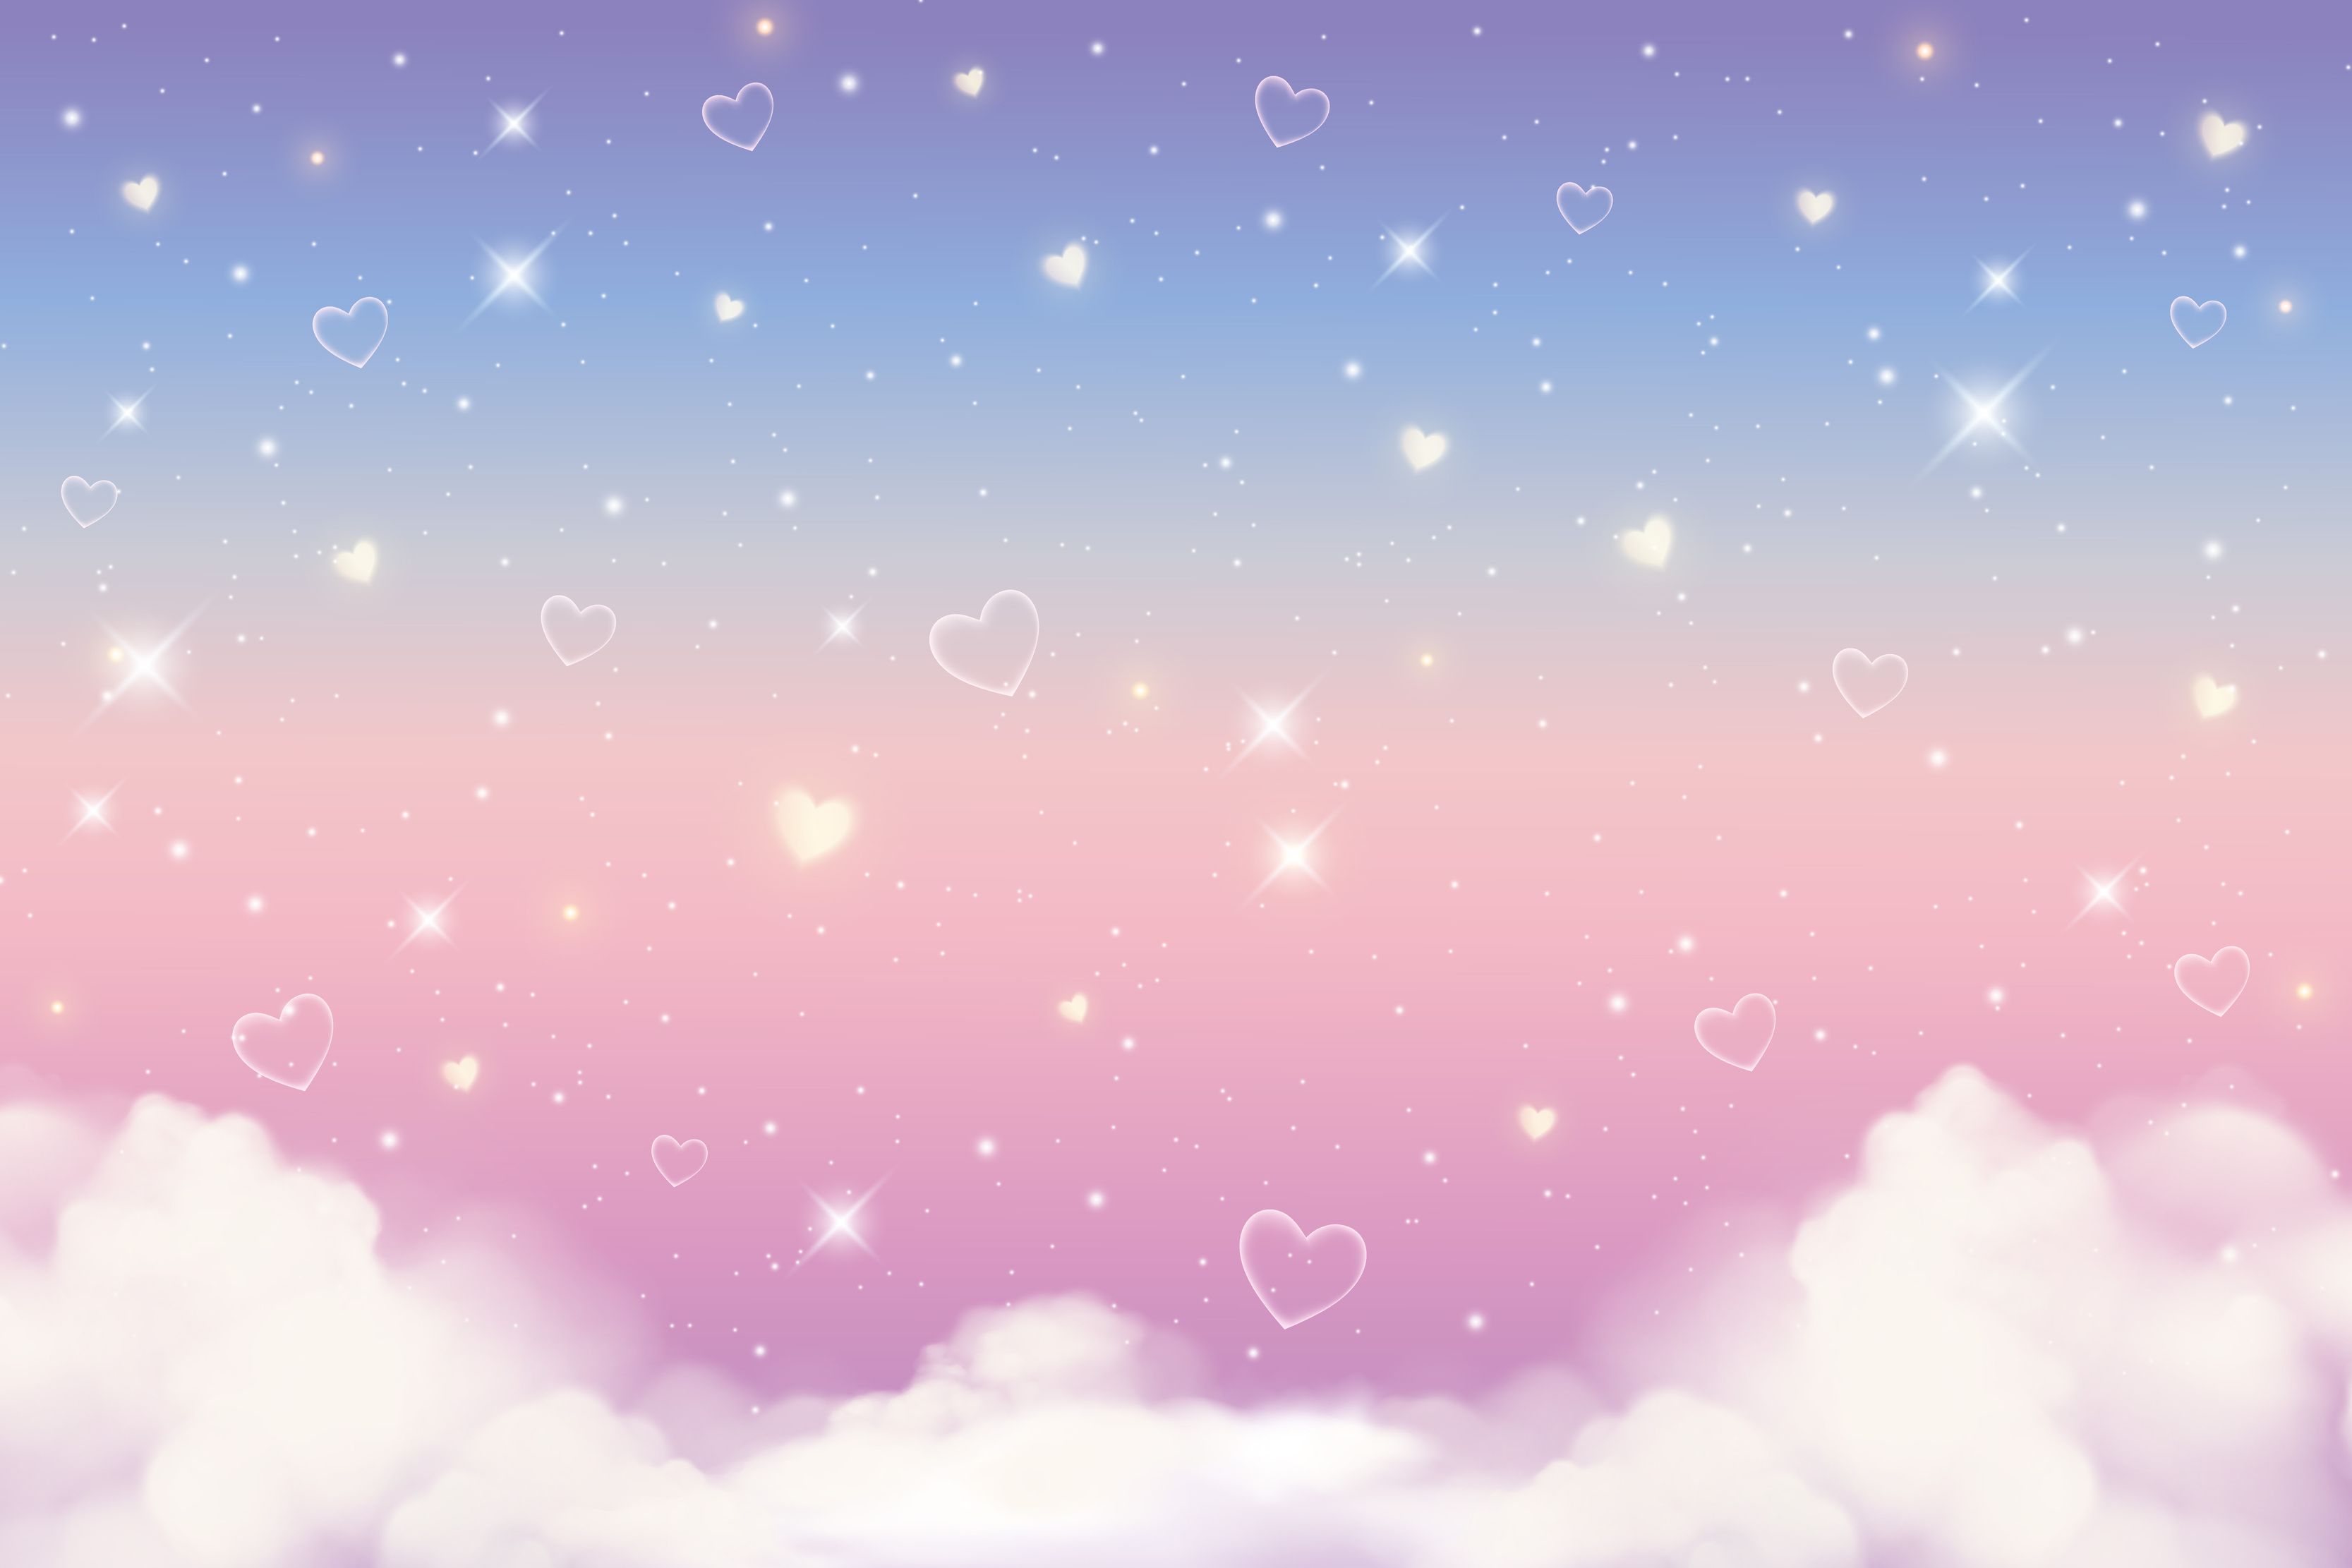 A sky with clouds and floating heart shaped lights - Pastel rainbow, magic